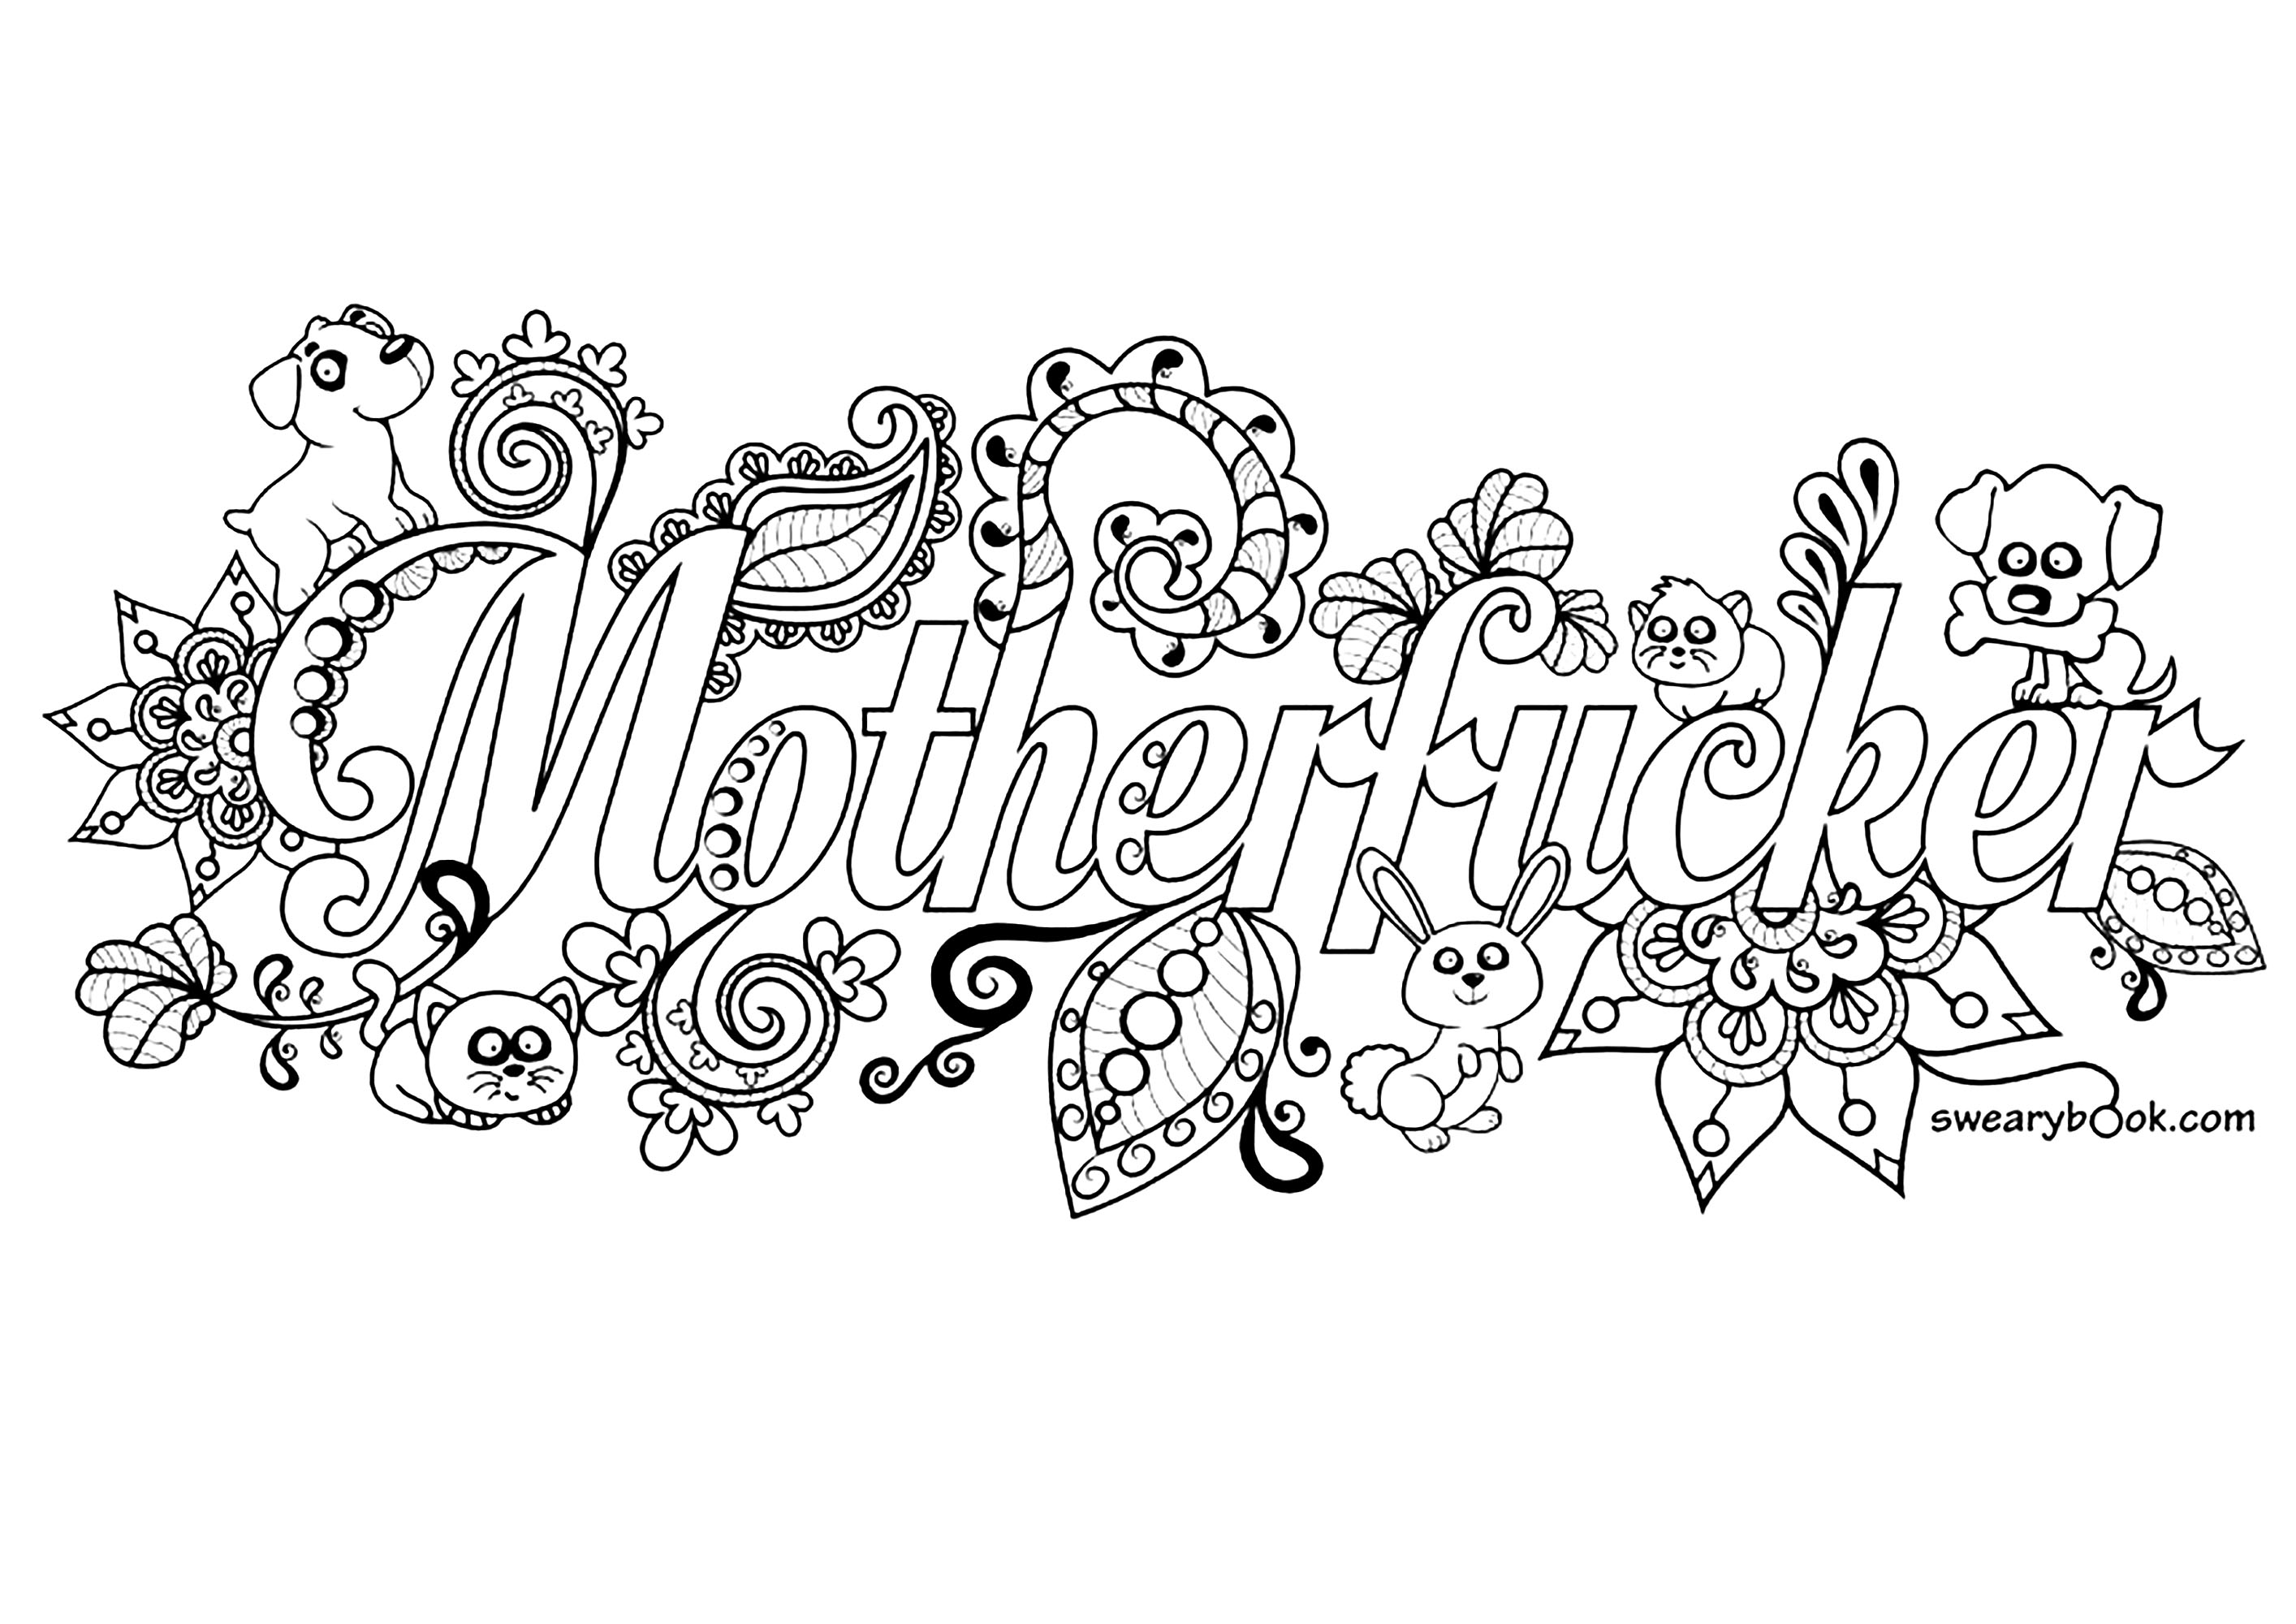 Motherfucker Swear word coloring page - Swear word Adult Coloring Pages